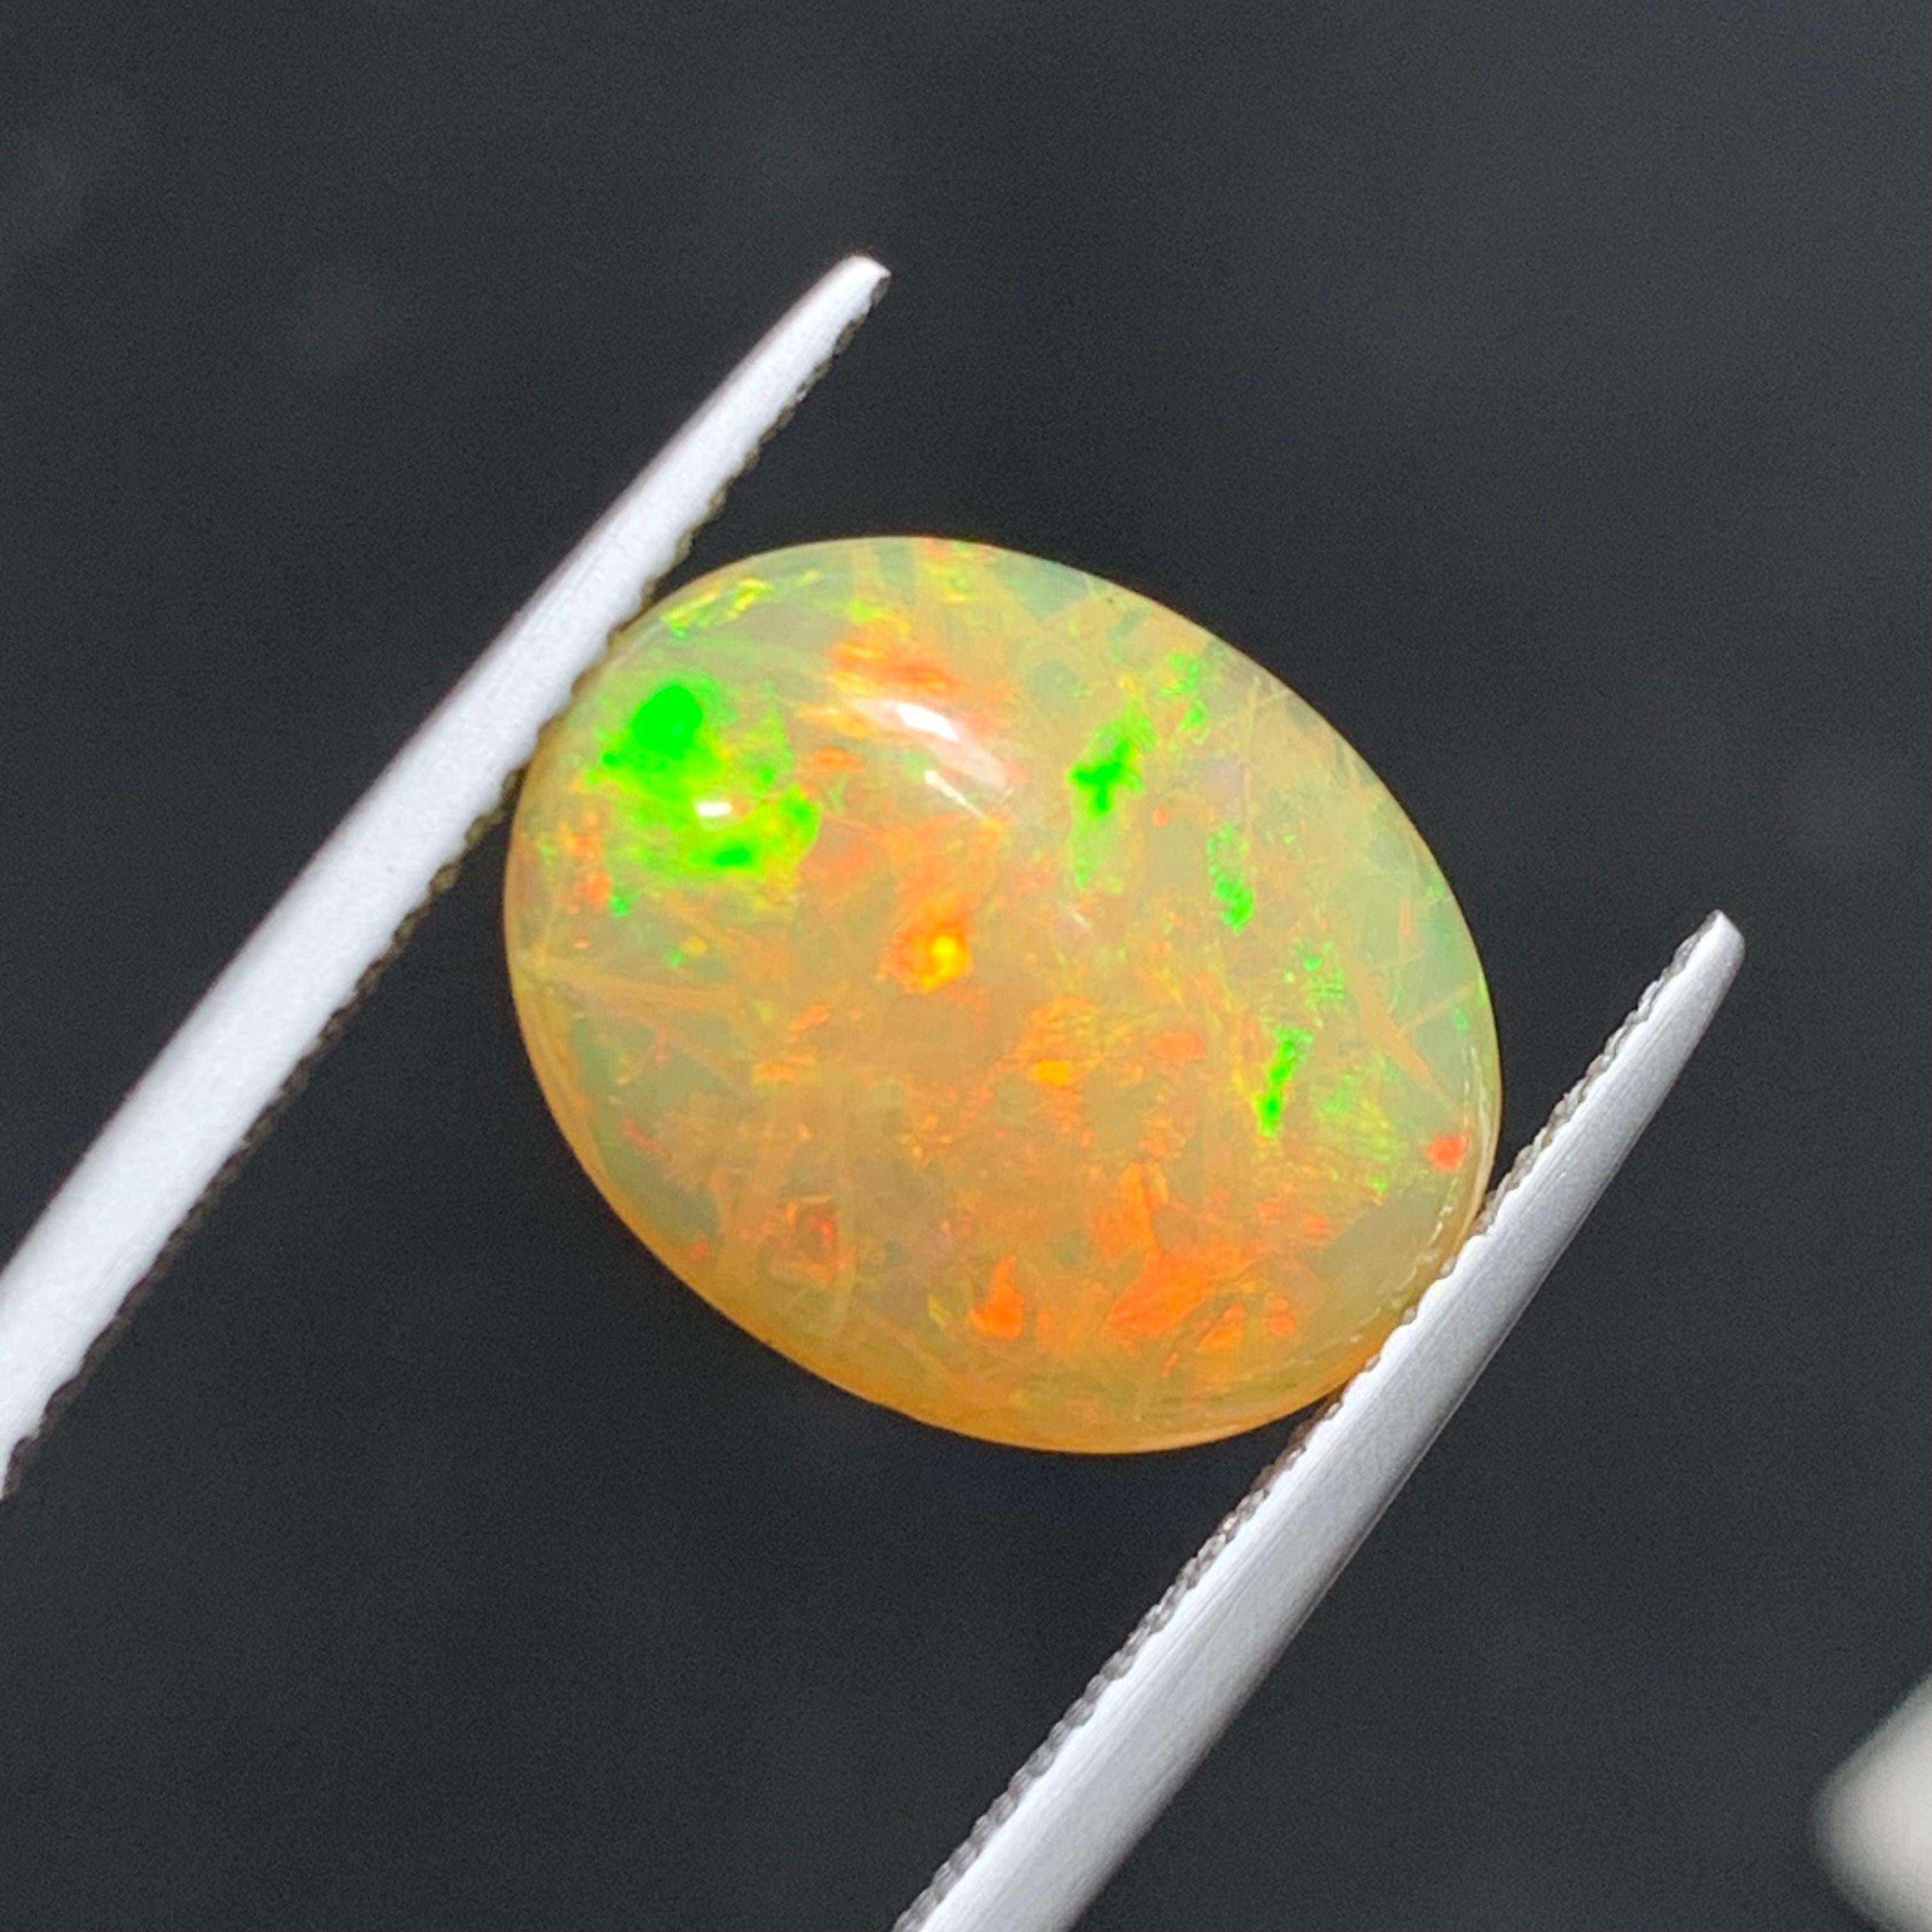 Rare Orange Creamy Natural Fire Opal Gemstone Cabochons, 20 Ct for Jewelry 4